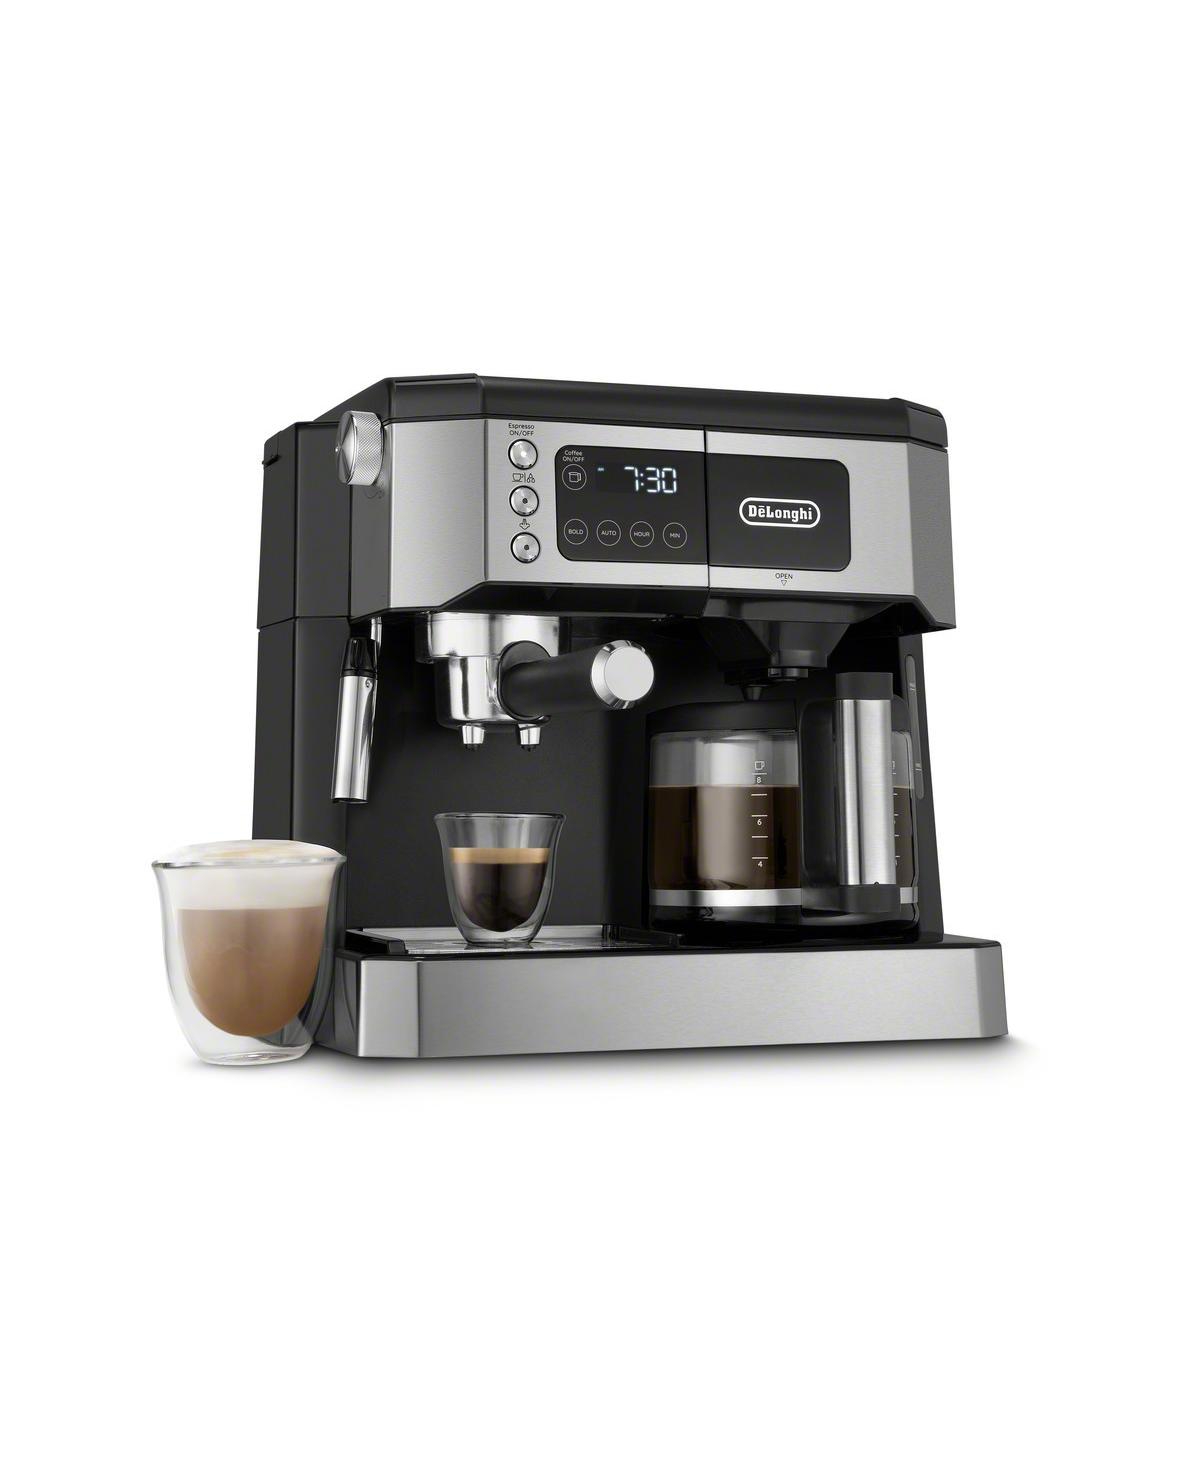 Delonghi All-in-one Combination Coffee And Espresso Machine In Black And Stainless Steel